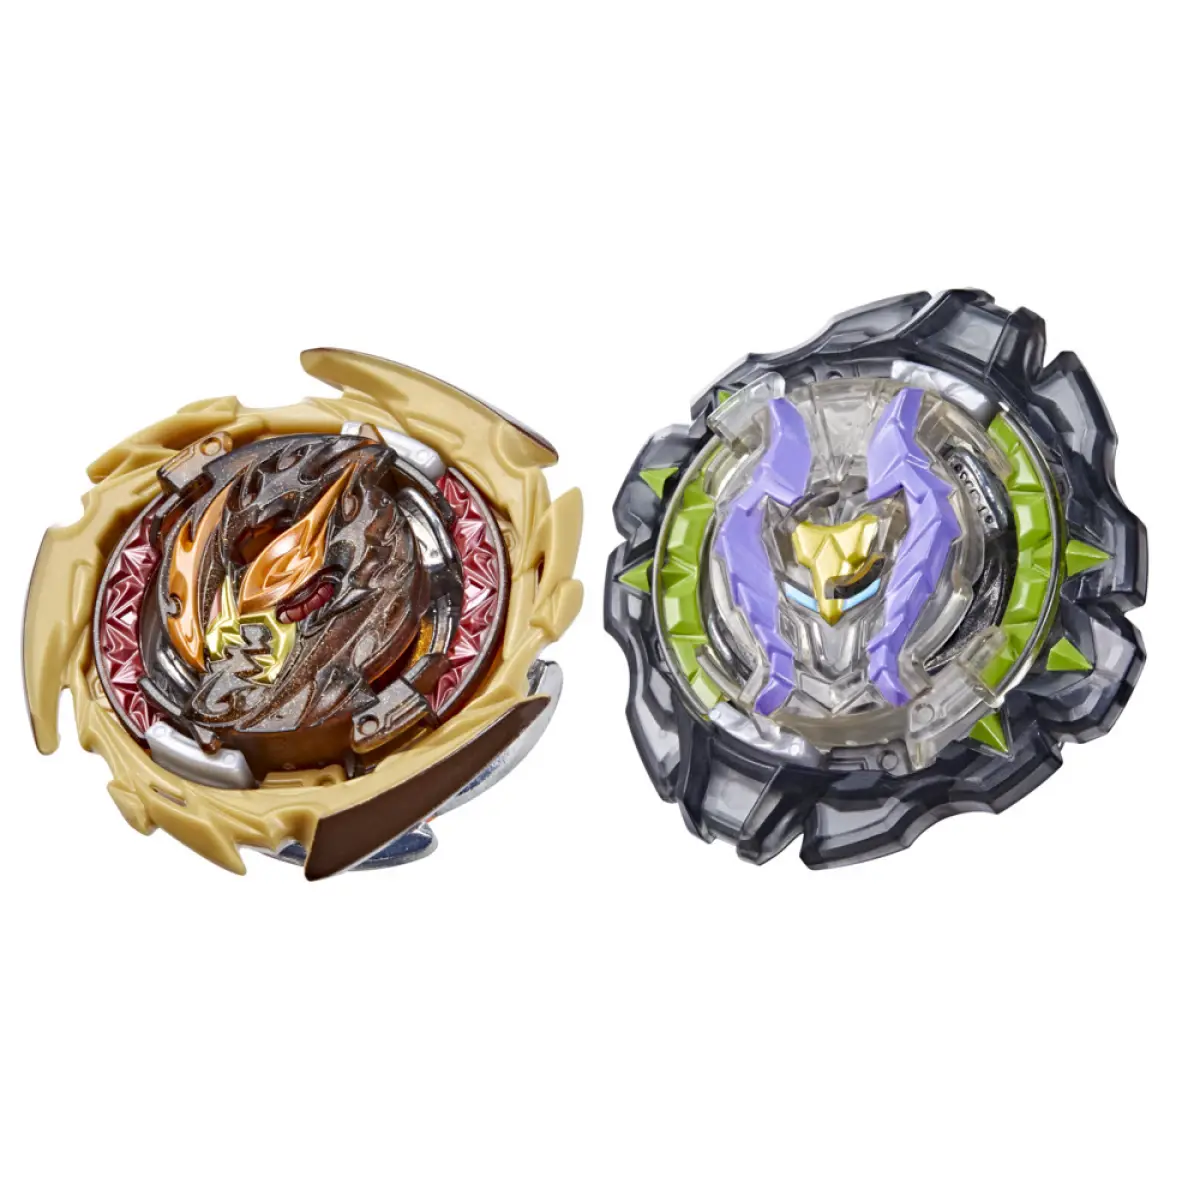 Beyblade Burst Quaddrive Destruction Ifritor I7 And Stone Nemesis N7 Spinning Top Dual Pack, 8Yrs+